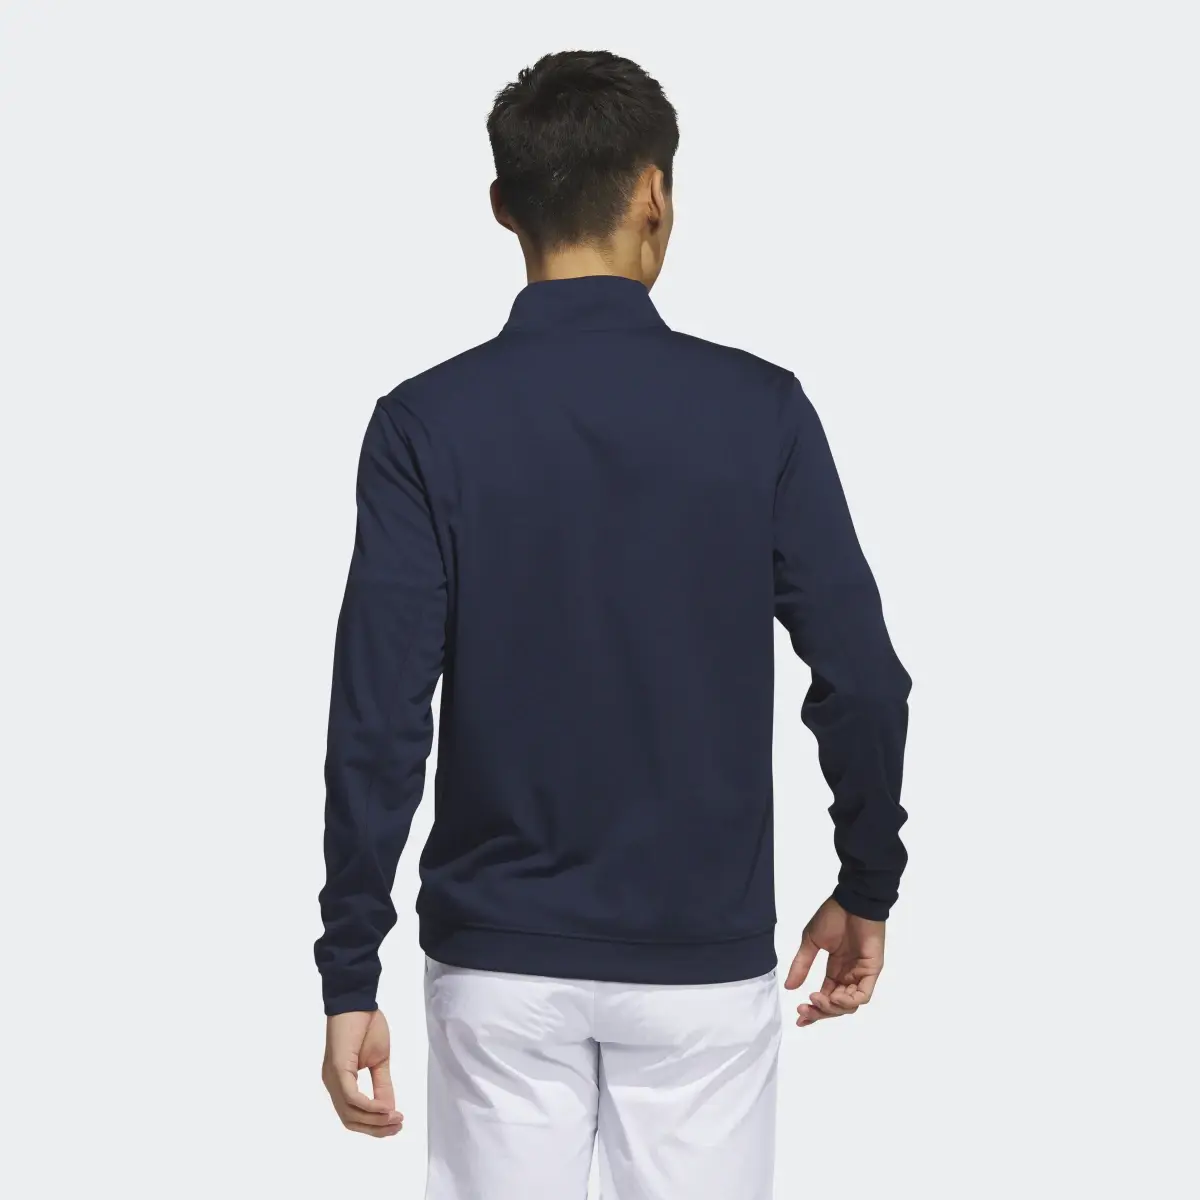 Adidas Elevated 1/4-Zip Pullover. 3